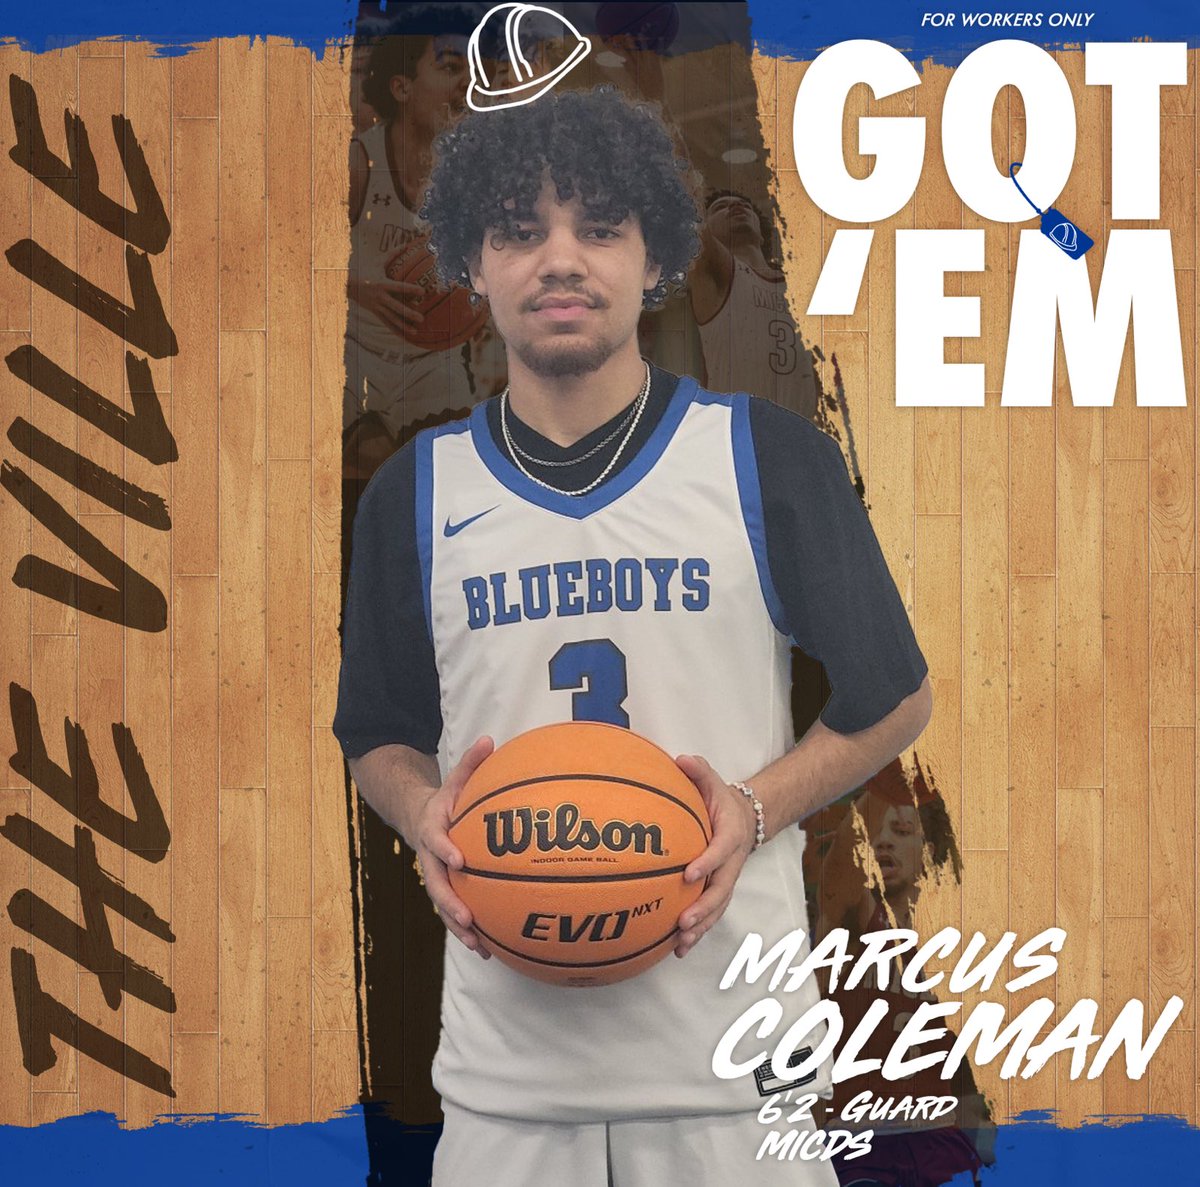 100% committed 🔵⚪️ Huge thanks to @CoachSchweer for the opportunity. Can't wait to get my career at the next level started with @BlueboysHoops @GatewayBBall @MICDSAthletics